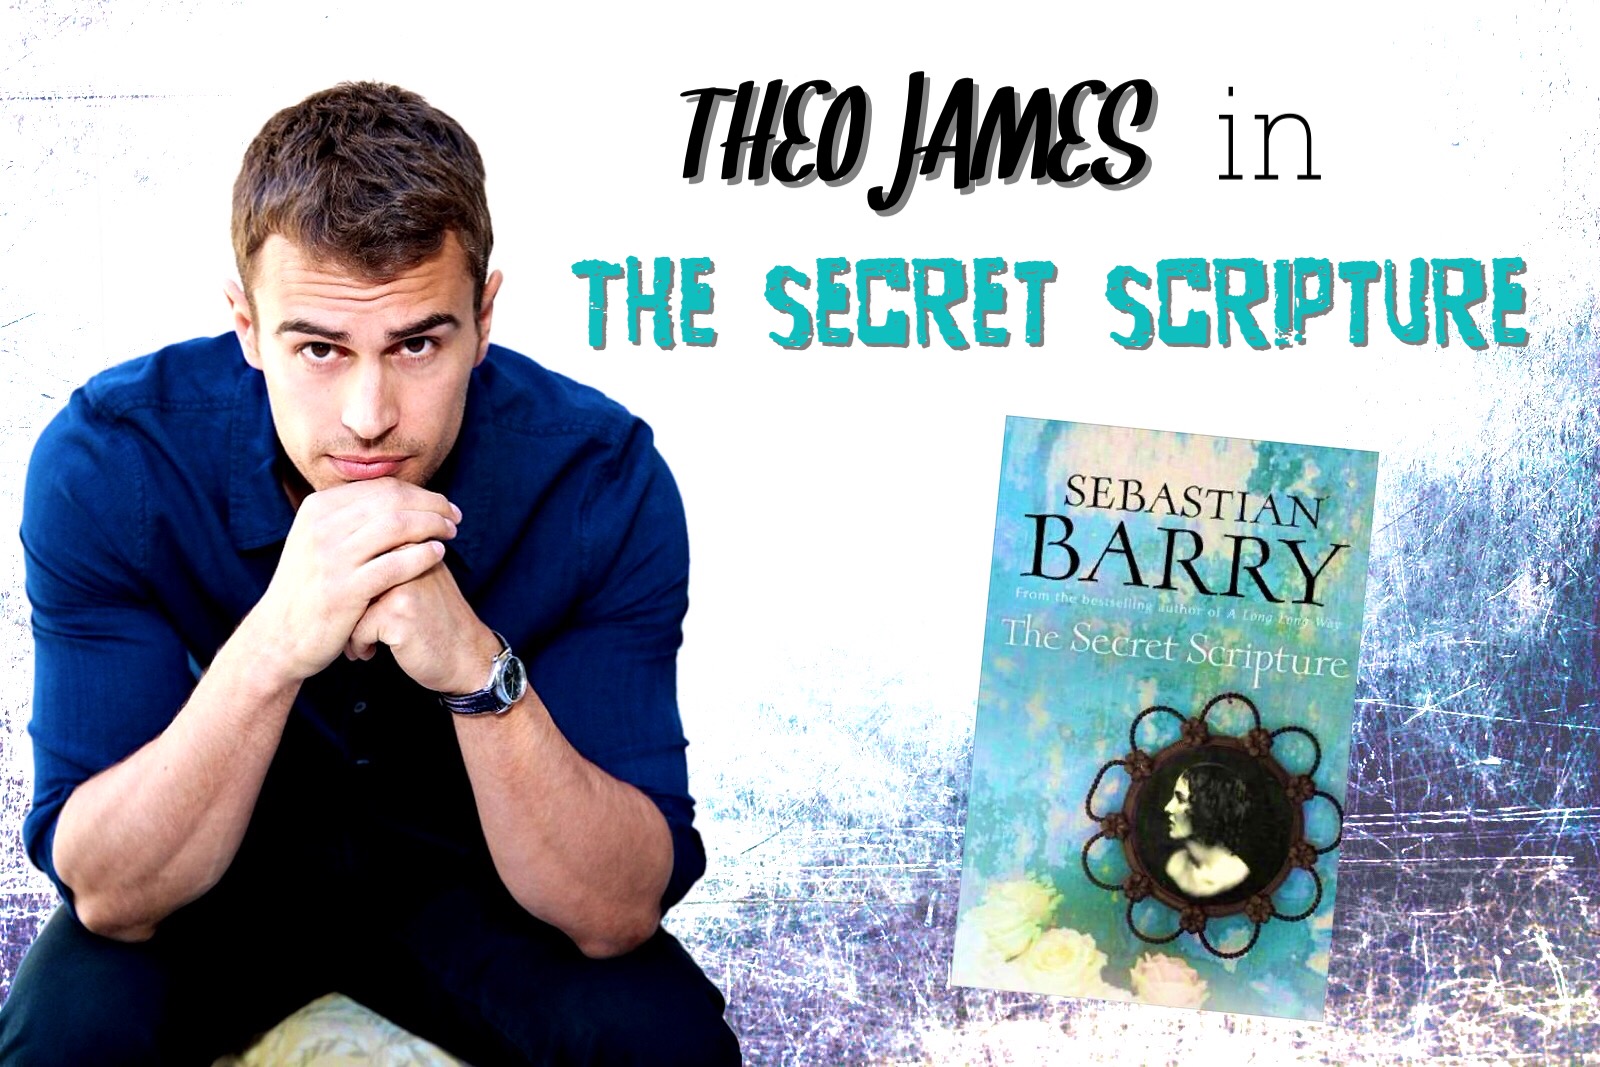 Open Casting in Ireland for Theo’s New Movie ‘The Secret Scripture’